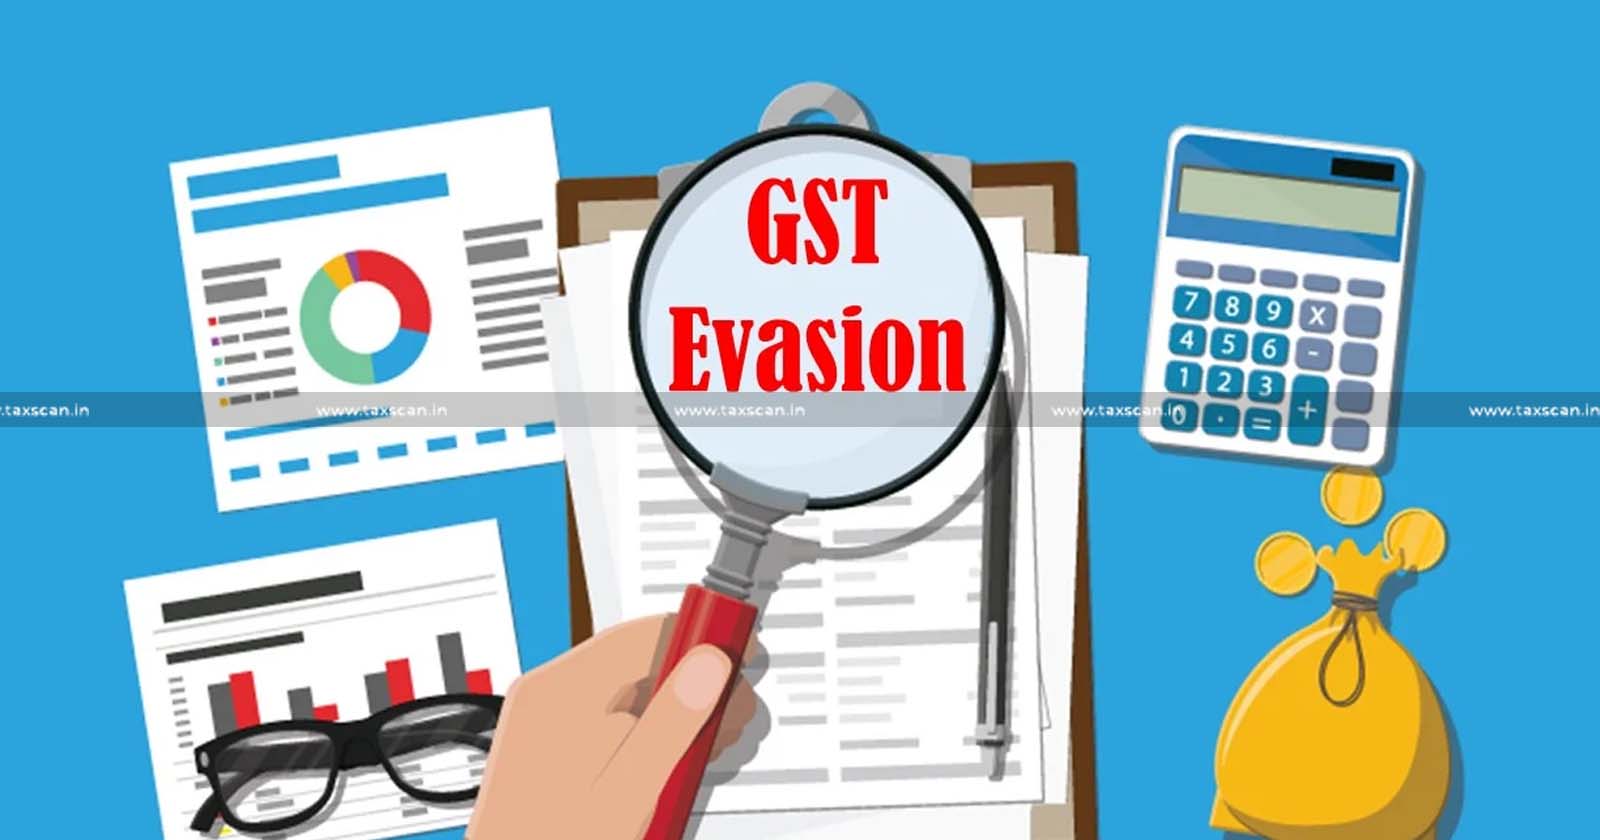 GST - Complete Code - Fake Invoices is Punishable Offence - Fake Invoices - Punishable Offence - Jharkhand High Court - FIR - GST Evasion - taxscan